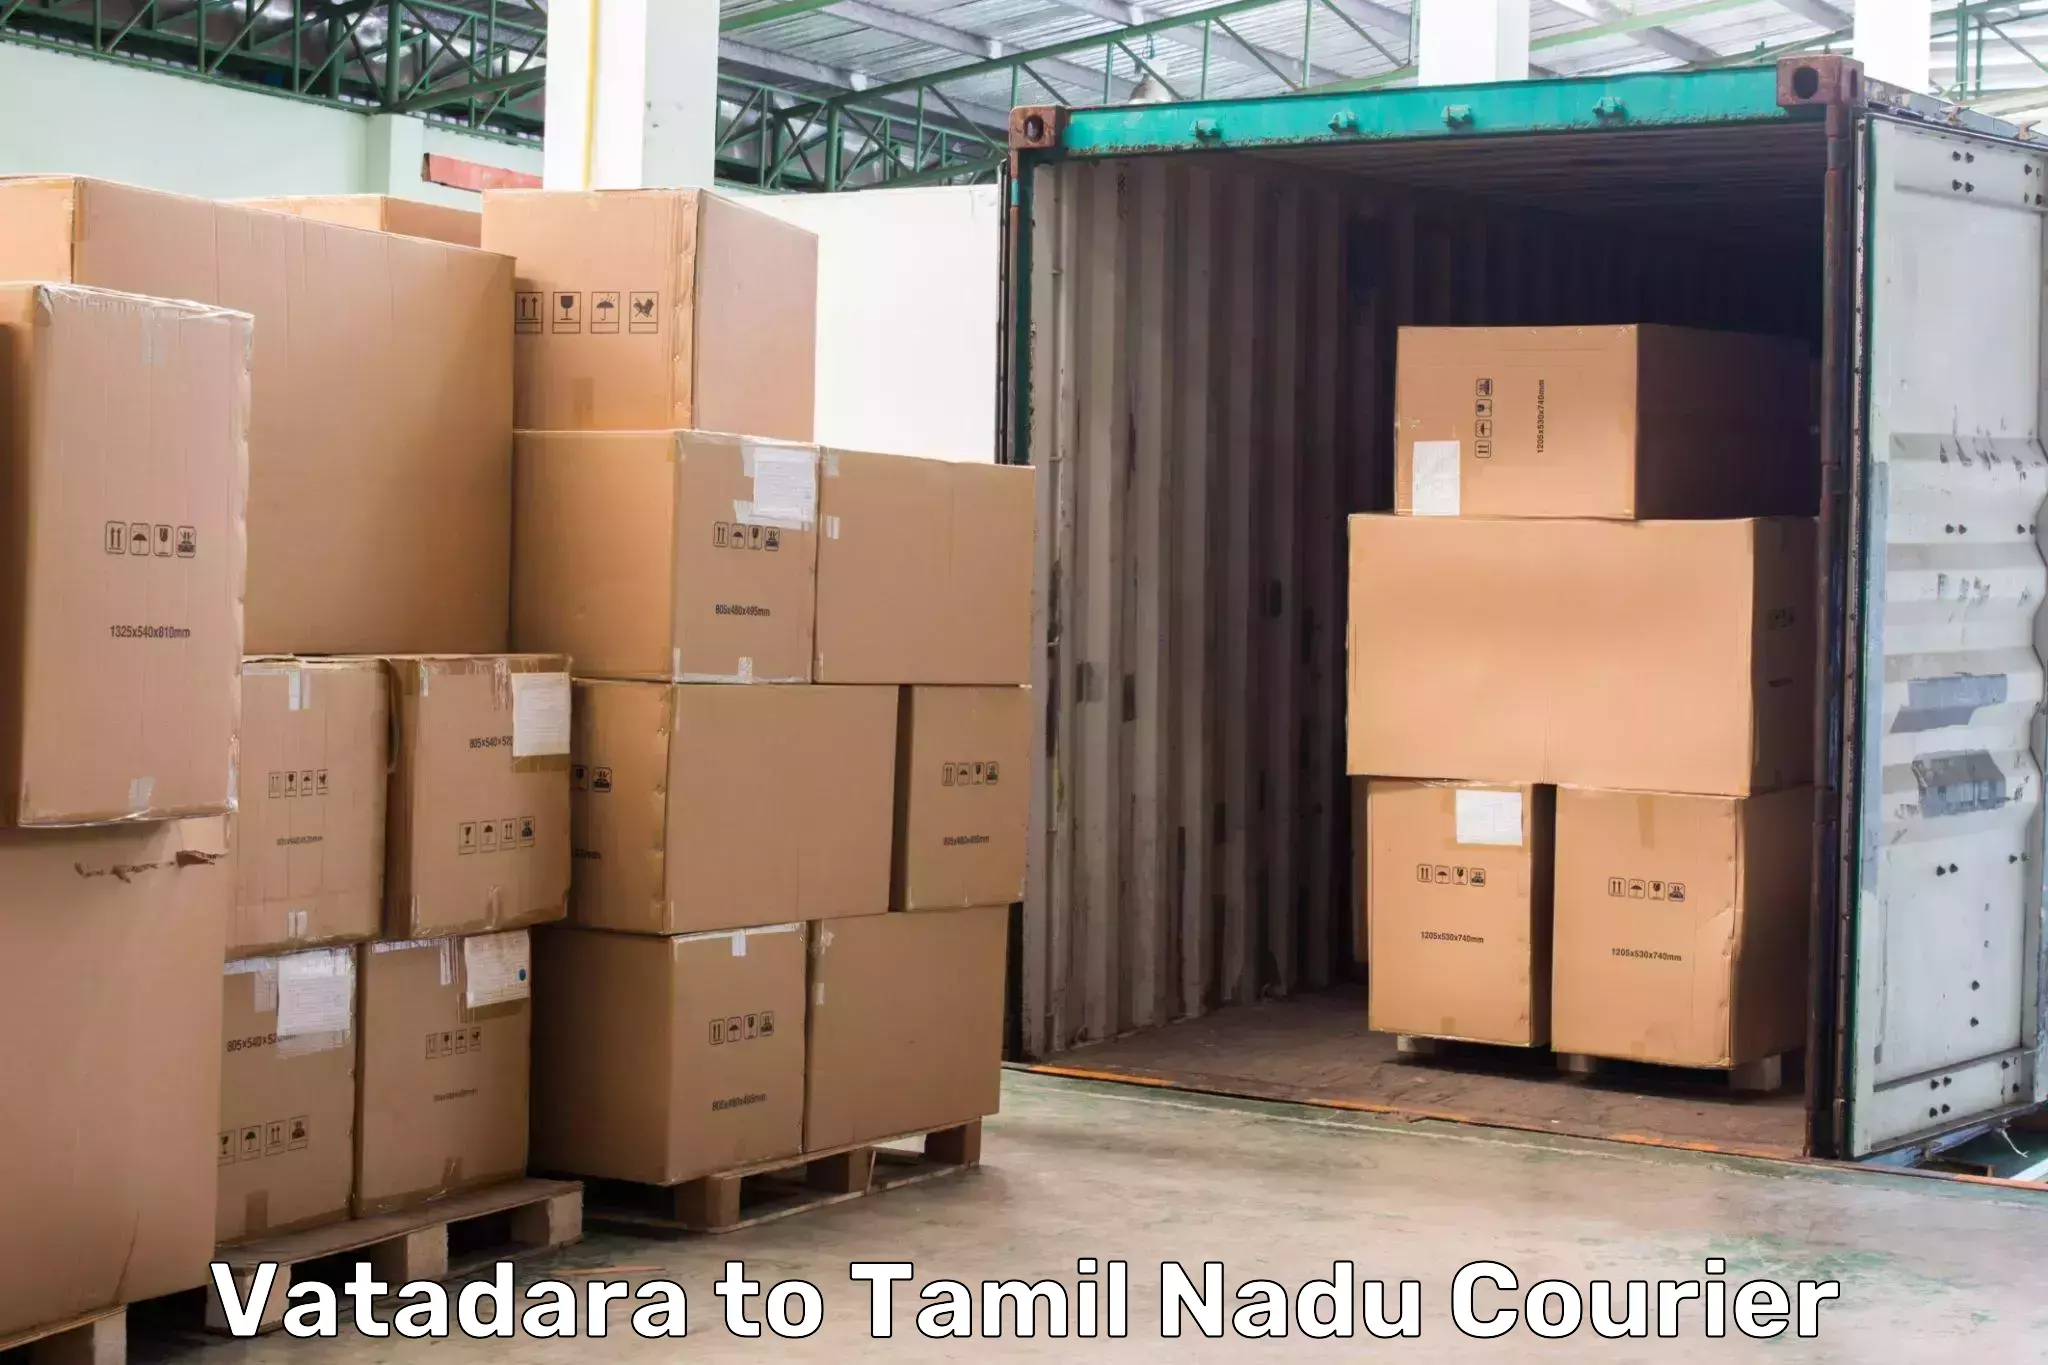 24/7 courier service Vatadara to Vellore Institute of Technology